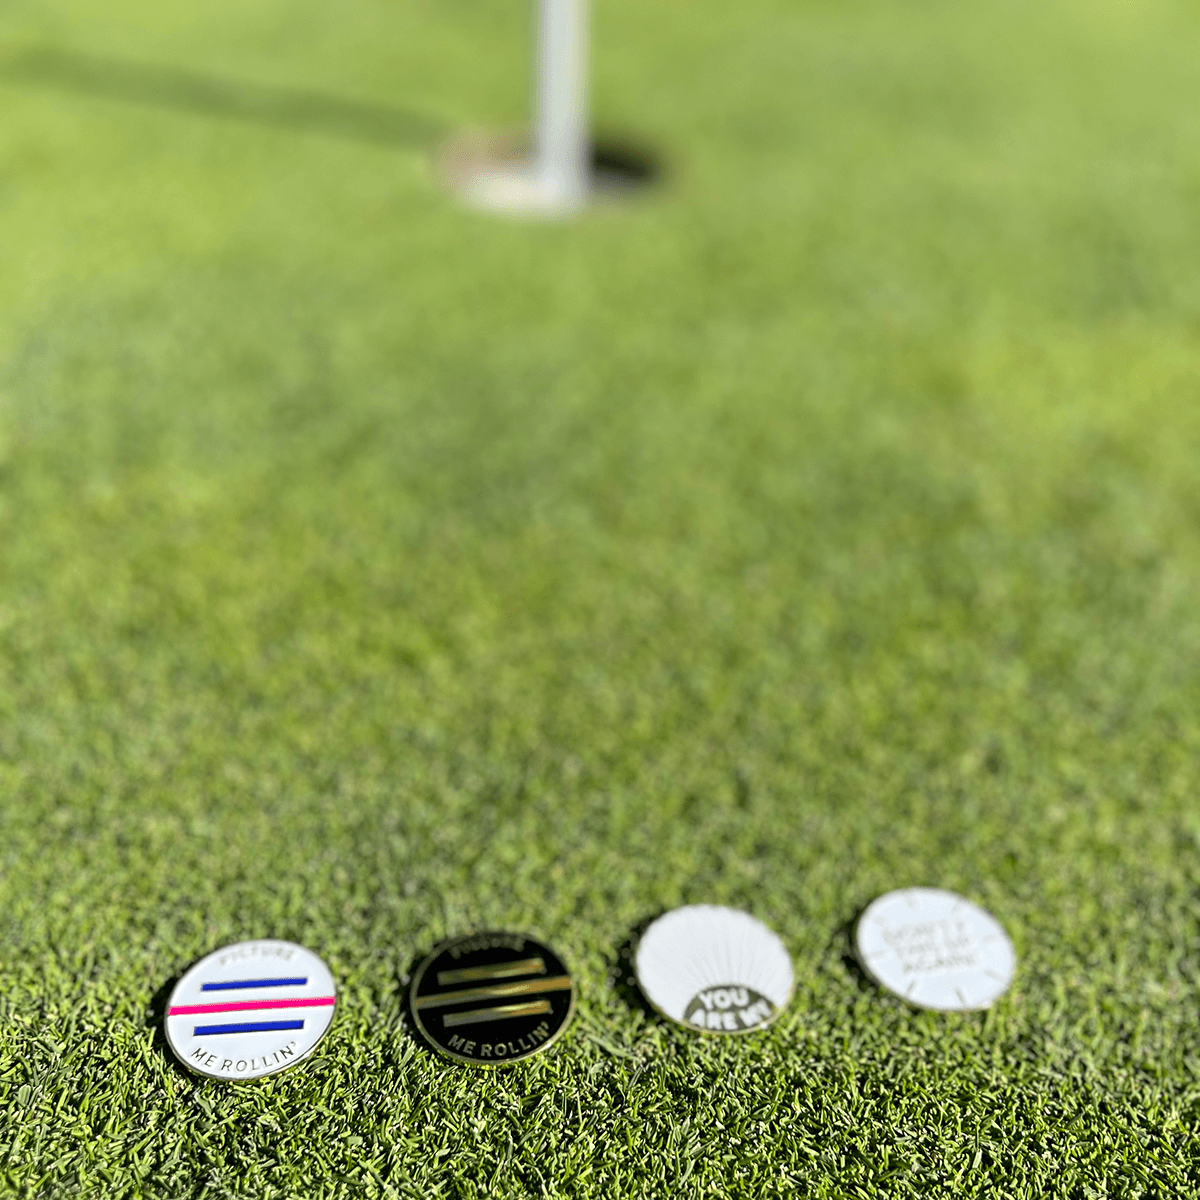 Make More Putts Alignment Golf Ball Marker Collection (set of 4) - Birdie Girl Golf